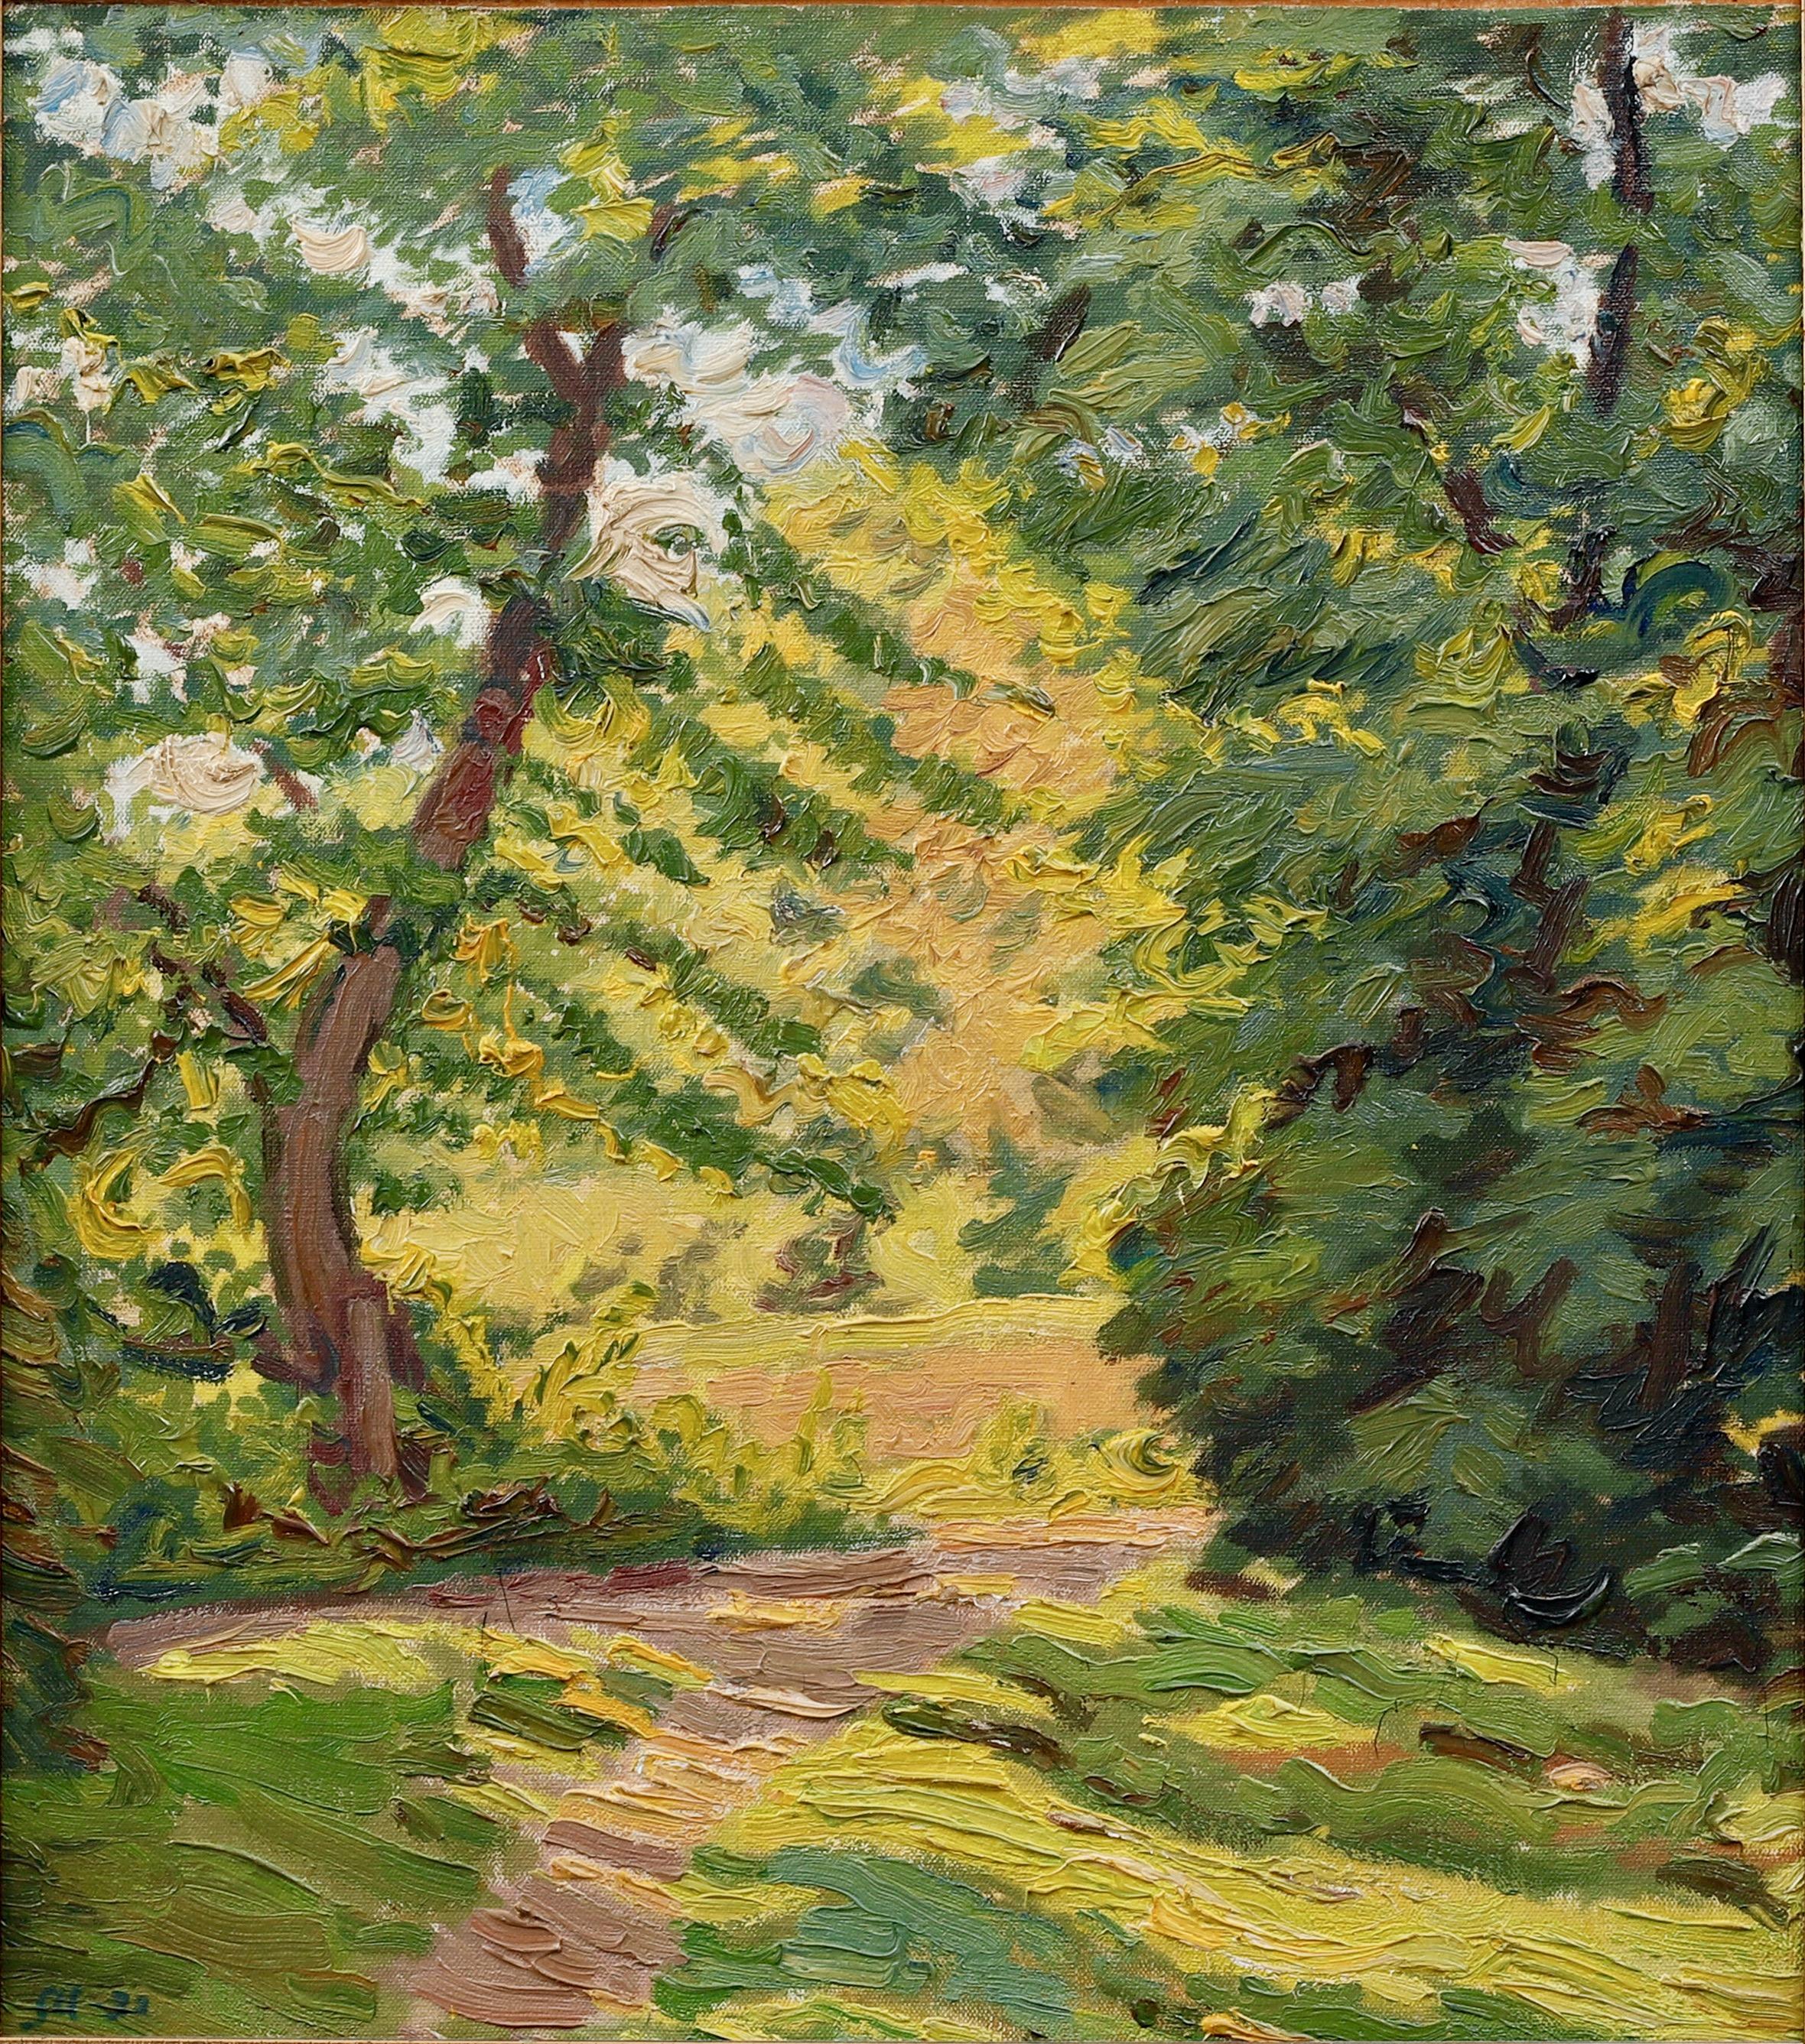 A painting of a forest clearing in intense green and yellow colors by Sigfrid Ullman (1886 - 1960). Oil on canvas laid on board. Signed with monogram SU and dated 1933.  Frame later. 
Sigfrid Ullman was a Swedish artist who started his artistic